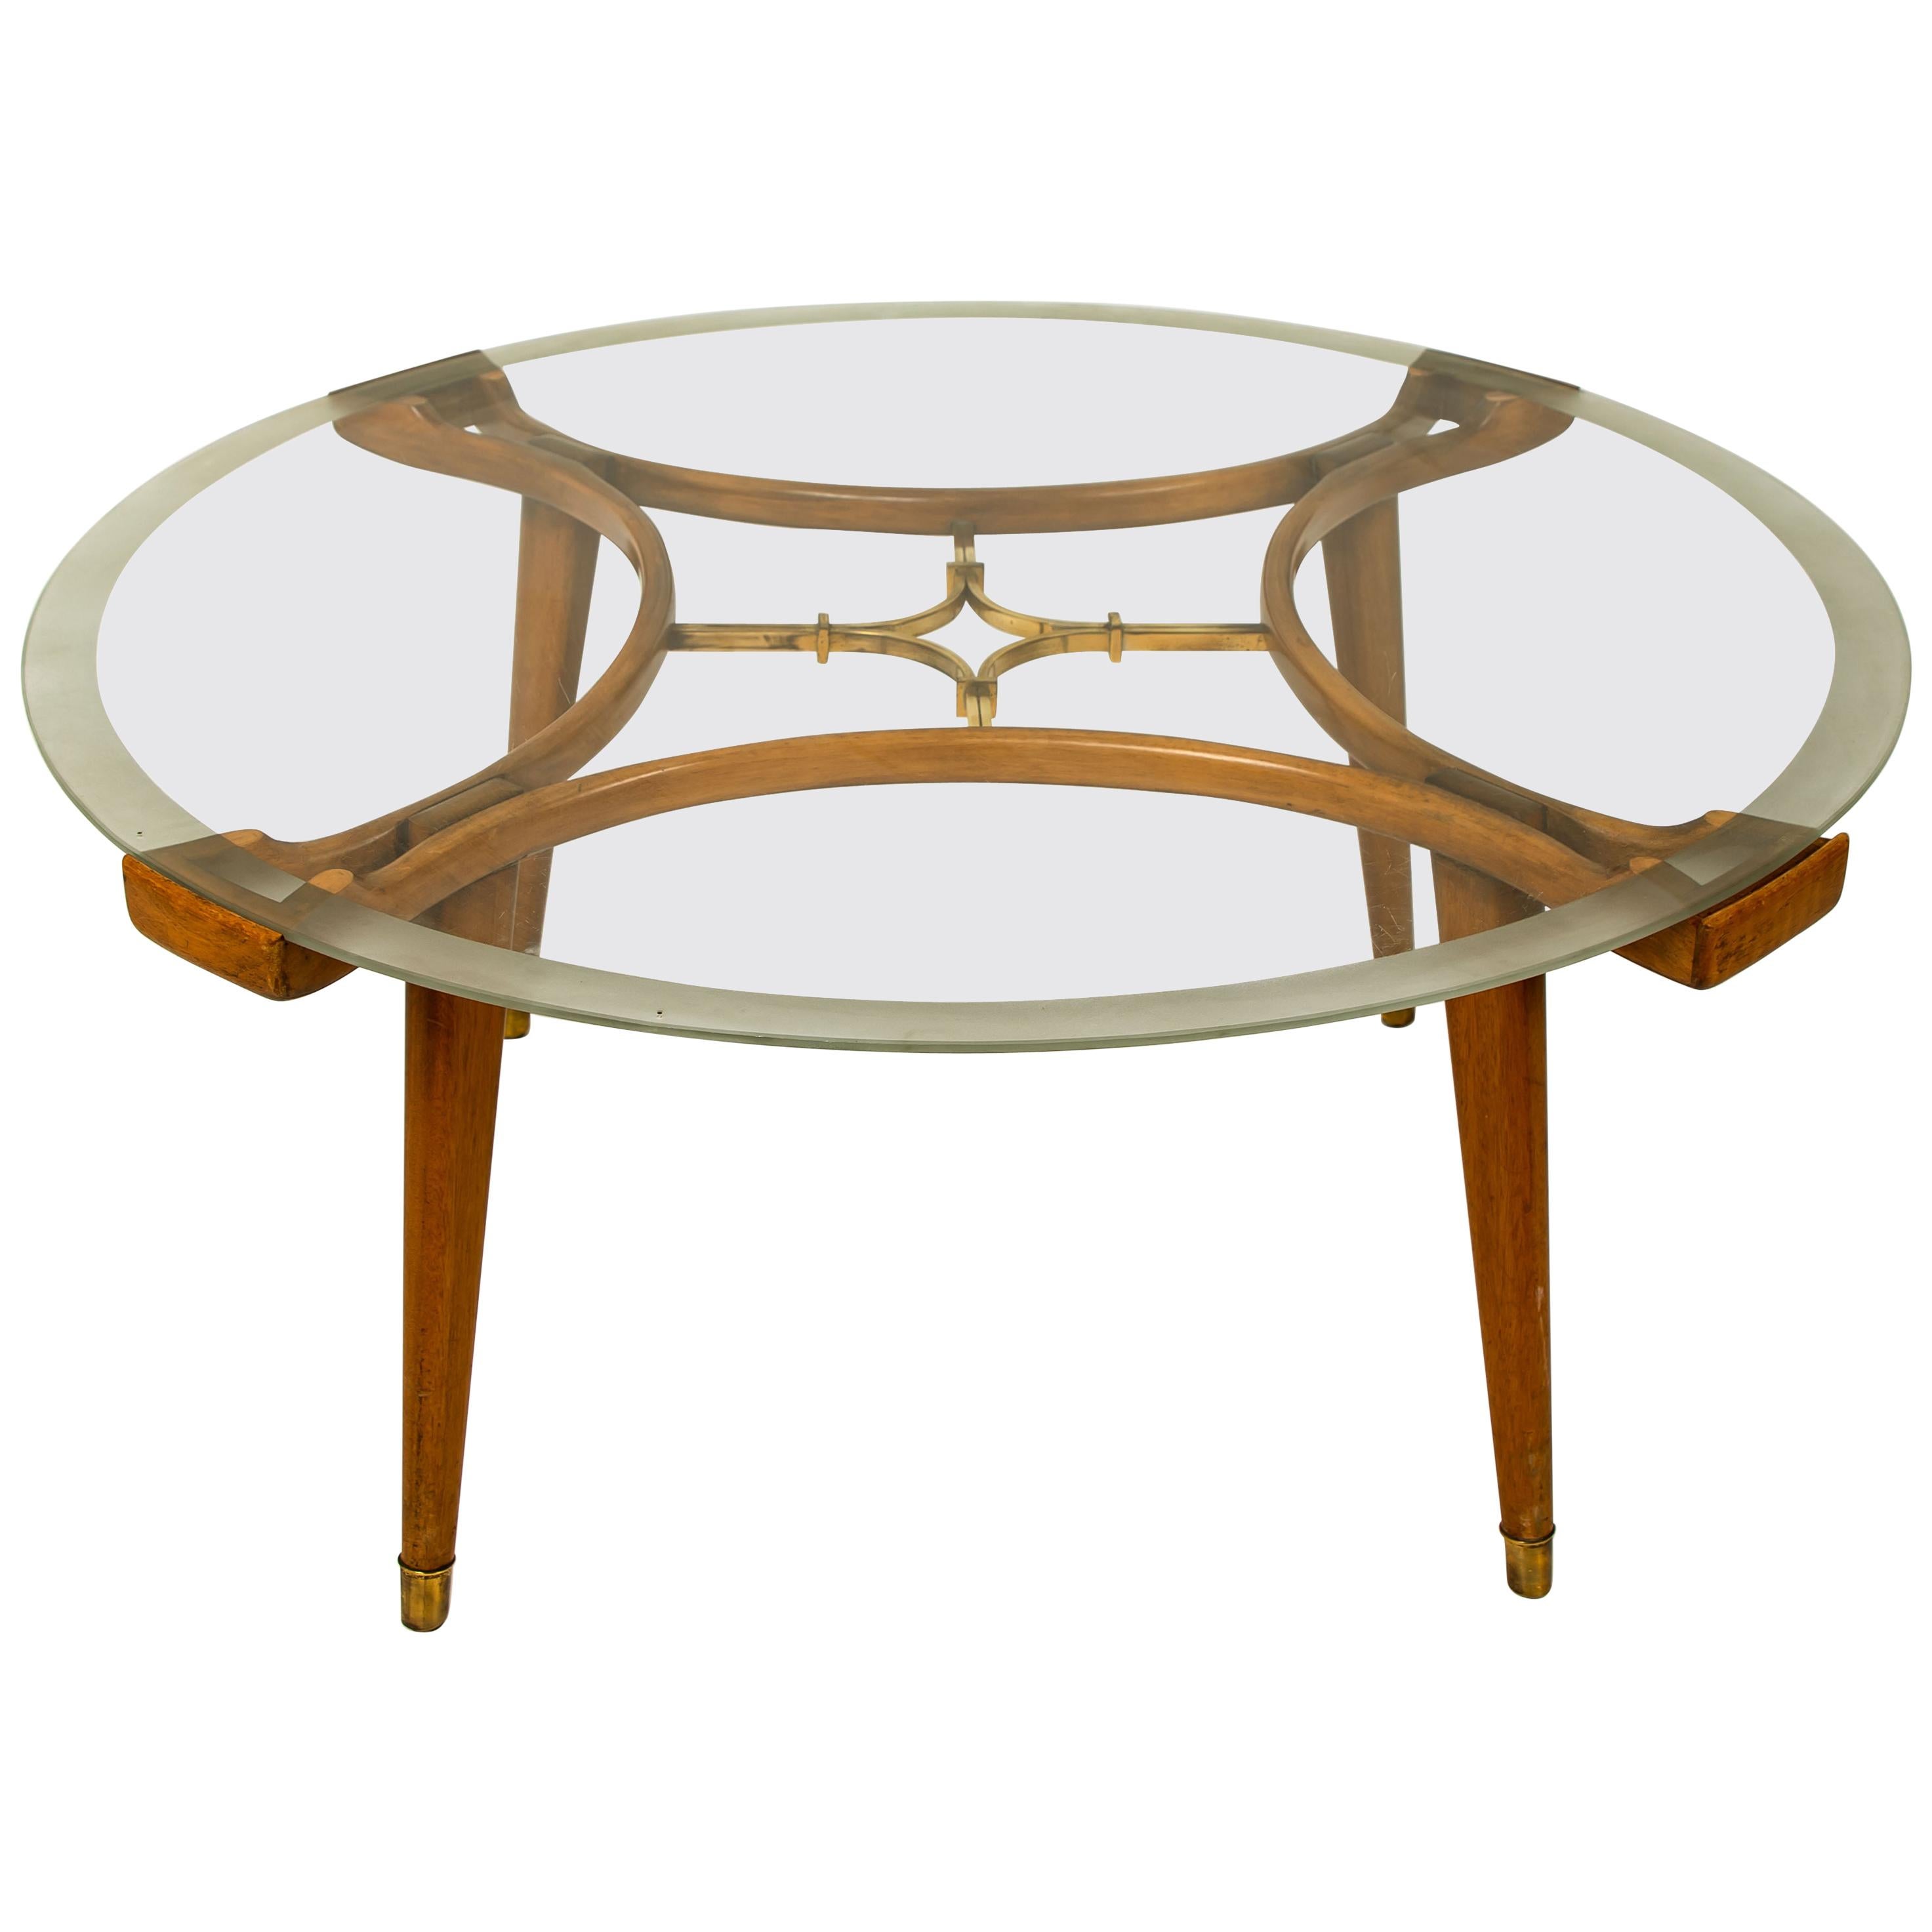 An original coffee table, designed by William Watting, produced by Fristho, the Netherlands, 1950s. A very special design due to the organic warm walnut wood combined with a transparent glass top. The center shows a beautiful solid brass detail.